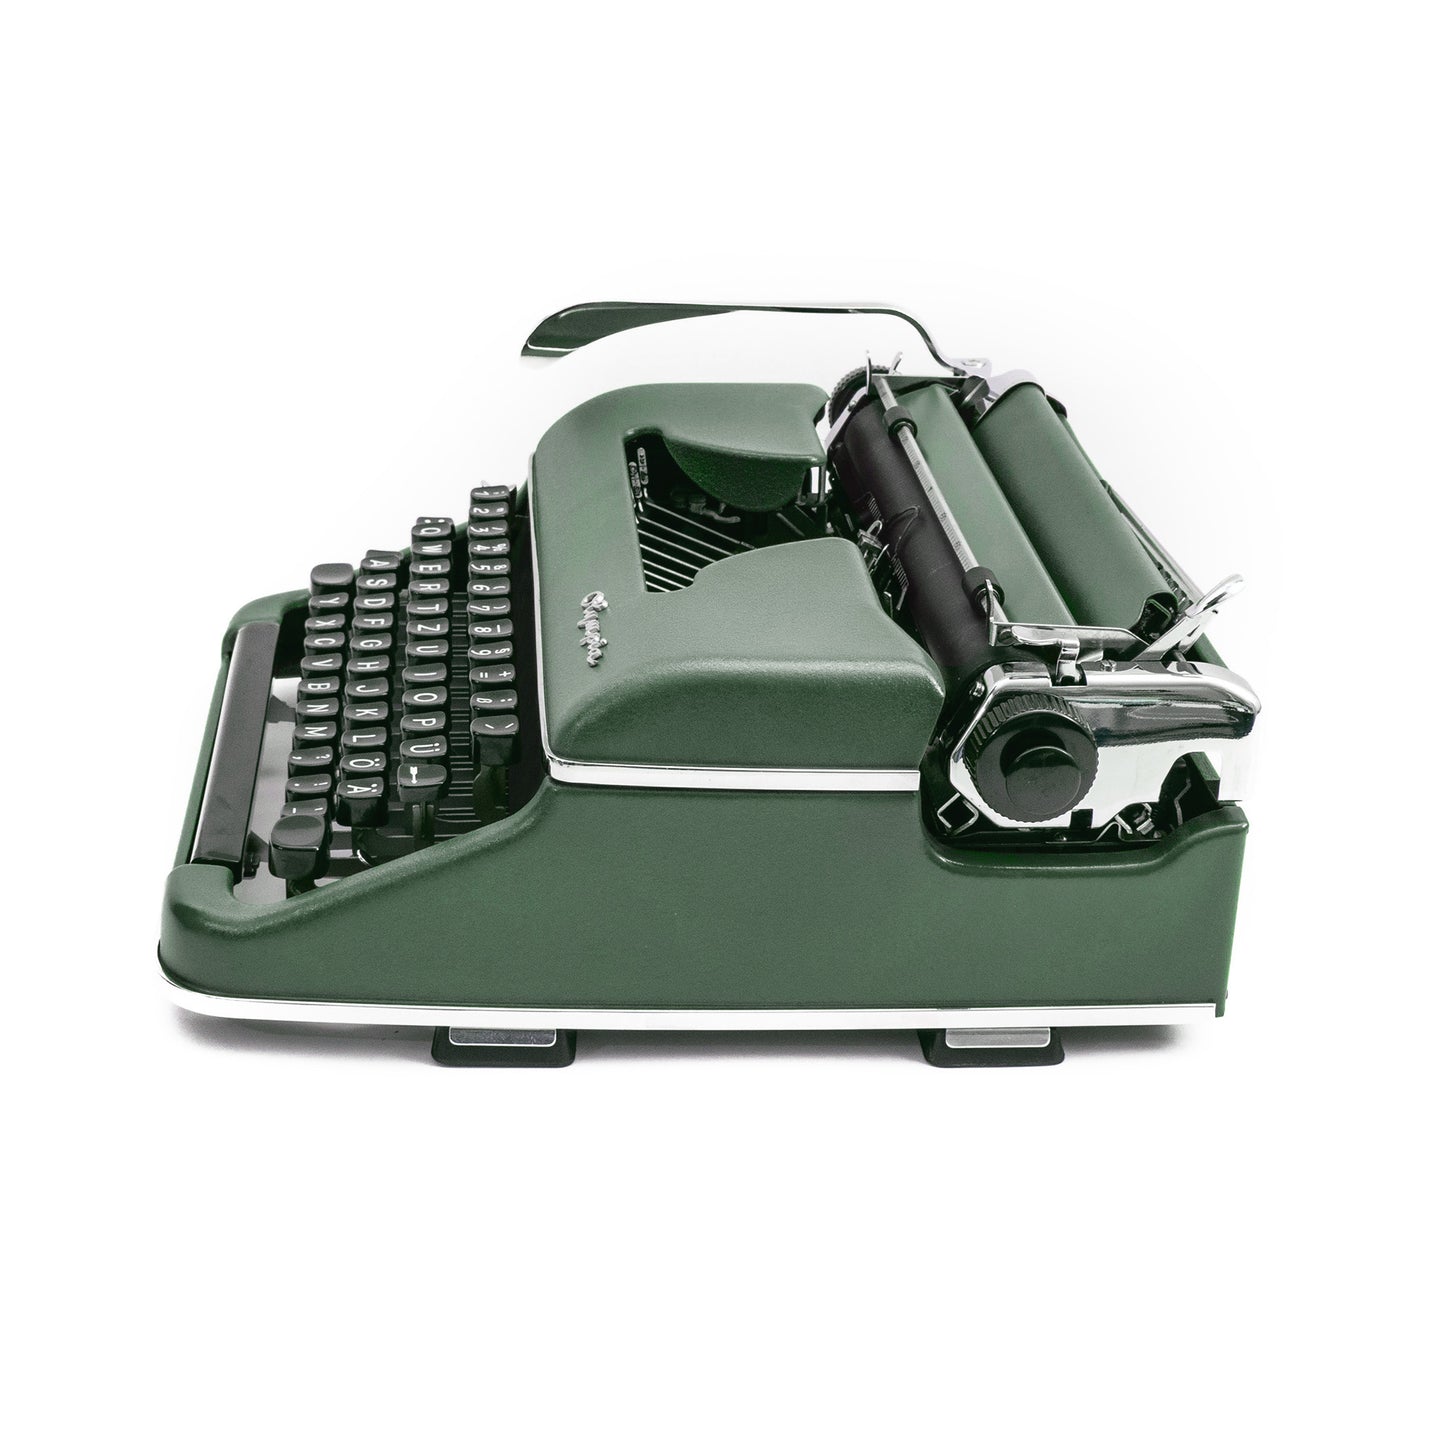 Typewriter Olympia SM2, Forest Green